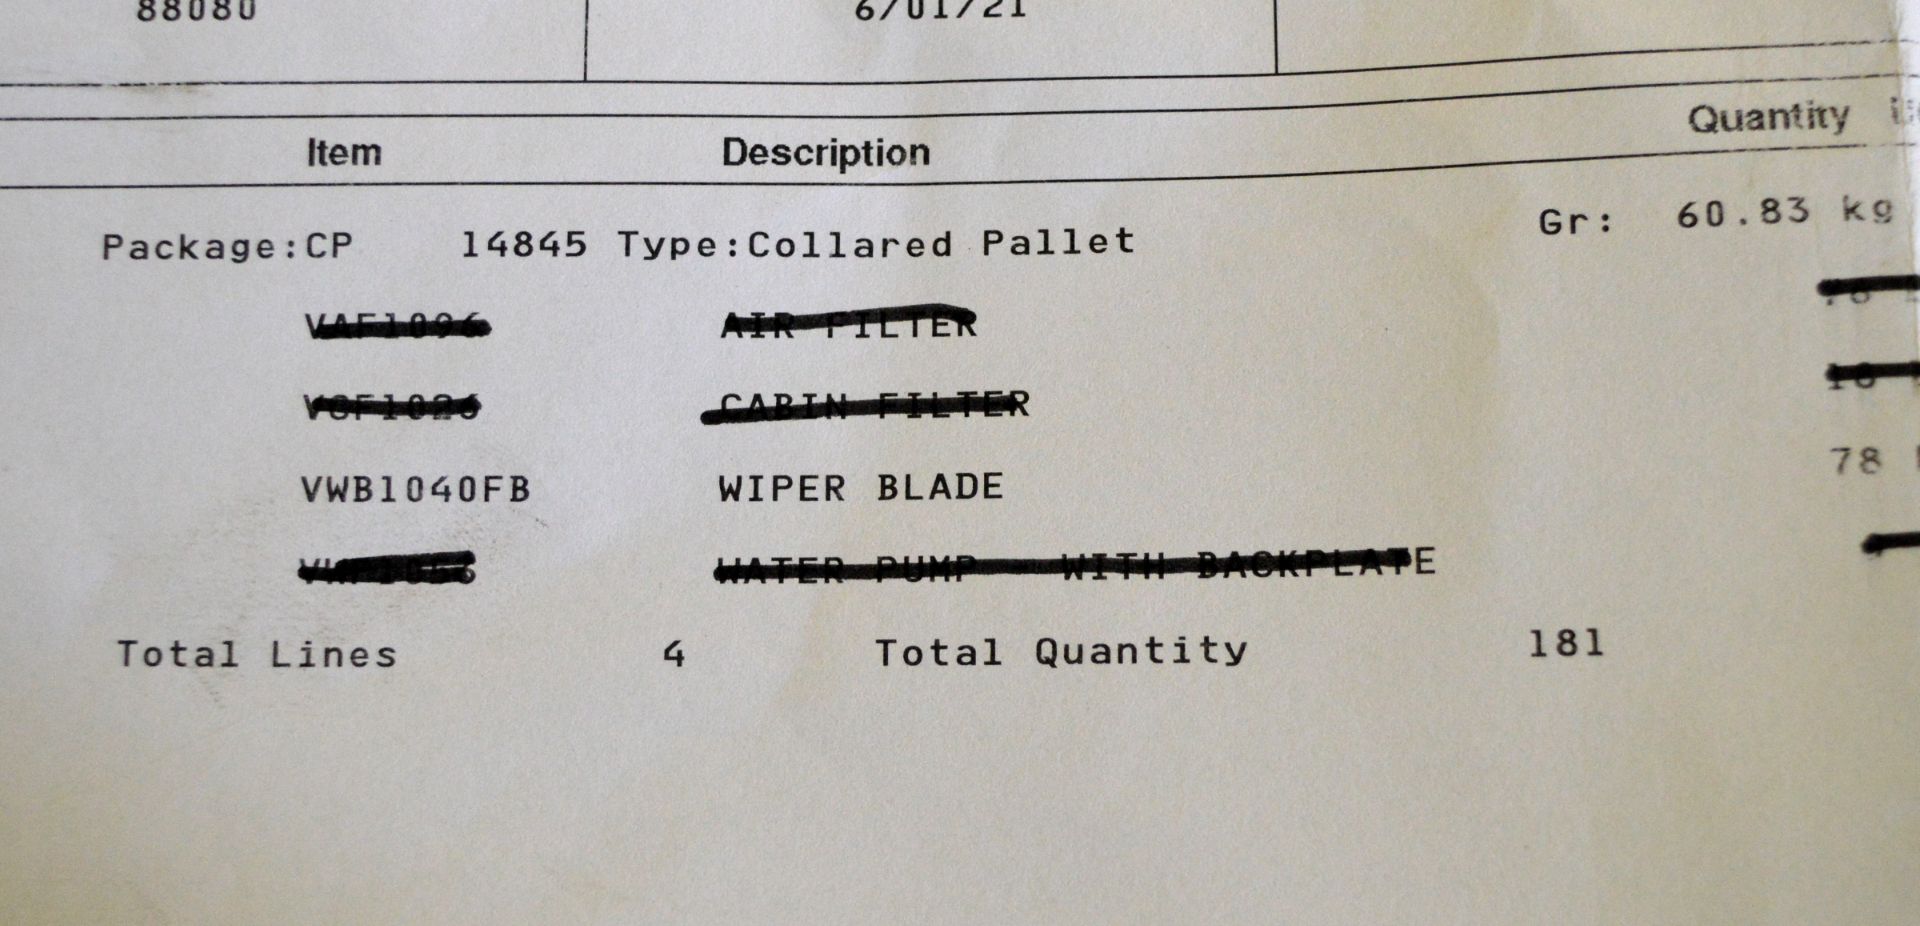 Vehicle parts - wiper blades, air filters - see picture for itinerary for model numbers an - Image 5 of 6